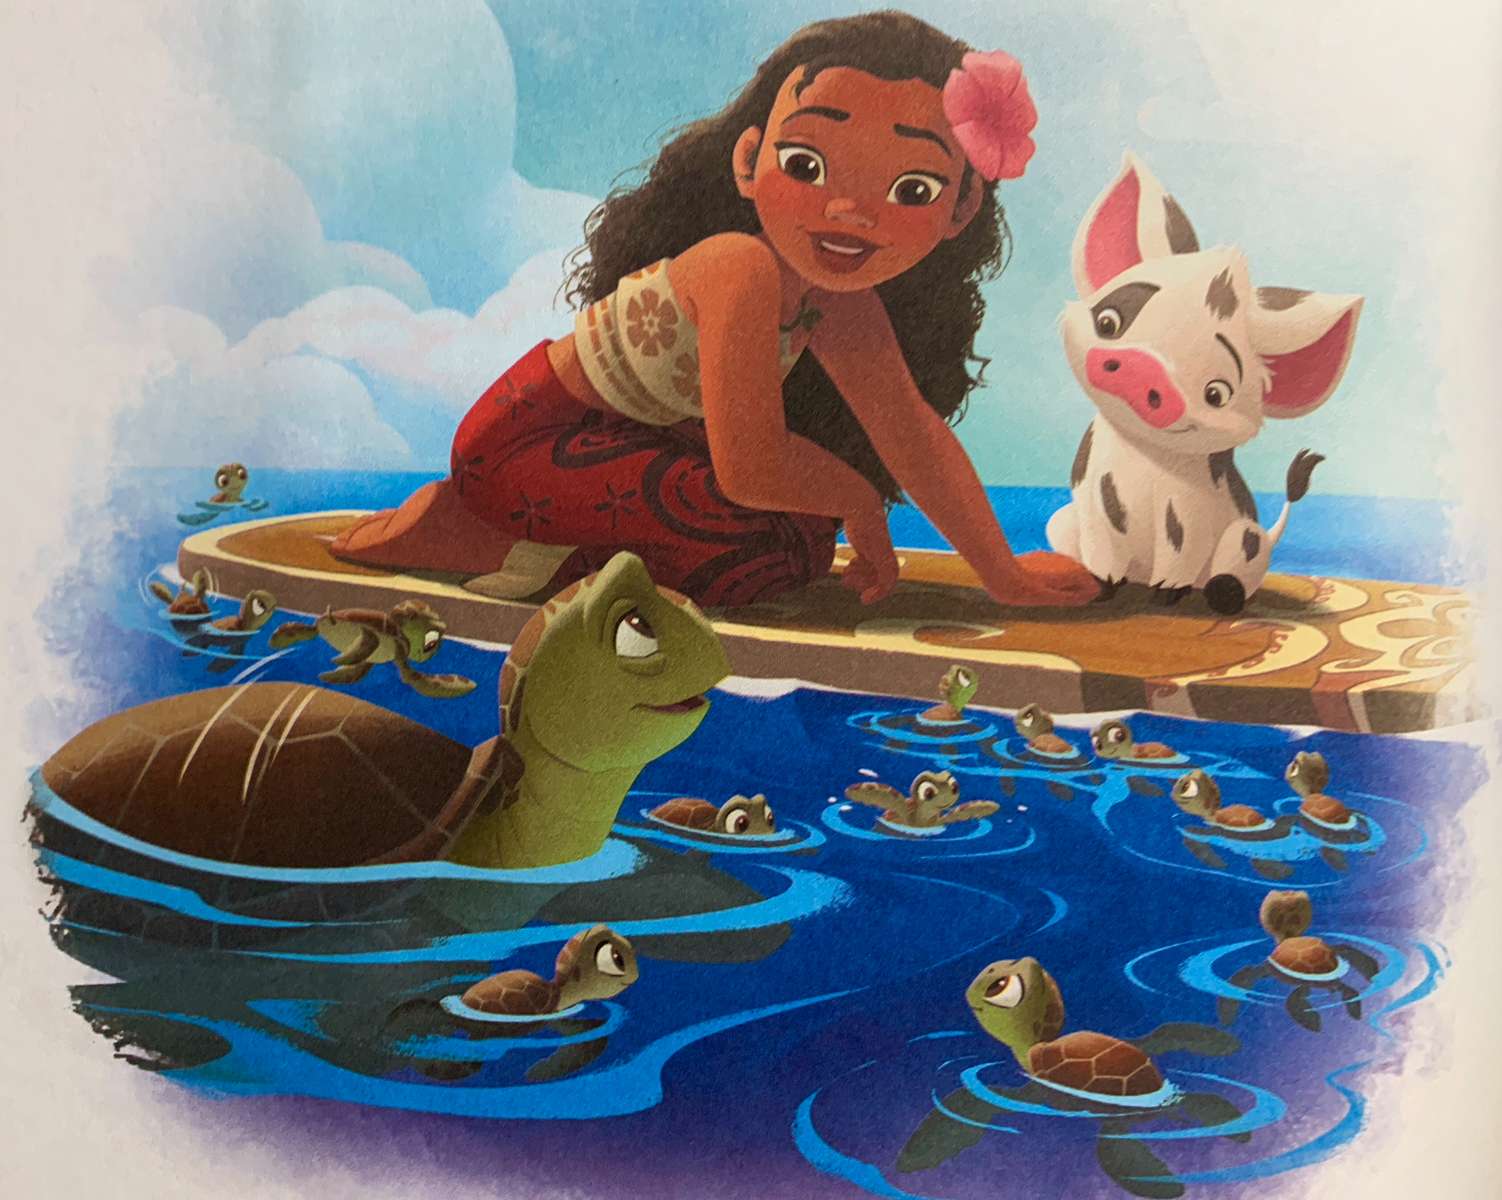 Moana, Pua, and Lolo with Her Babies online puzzle